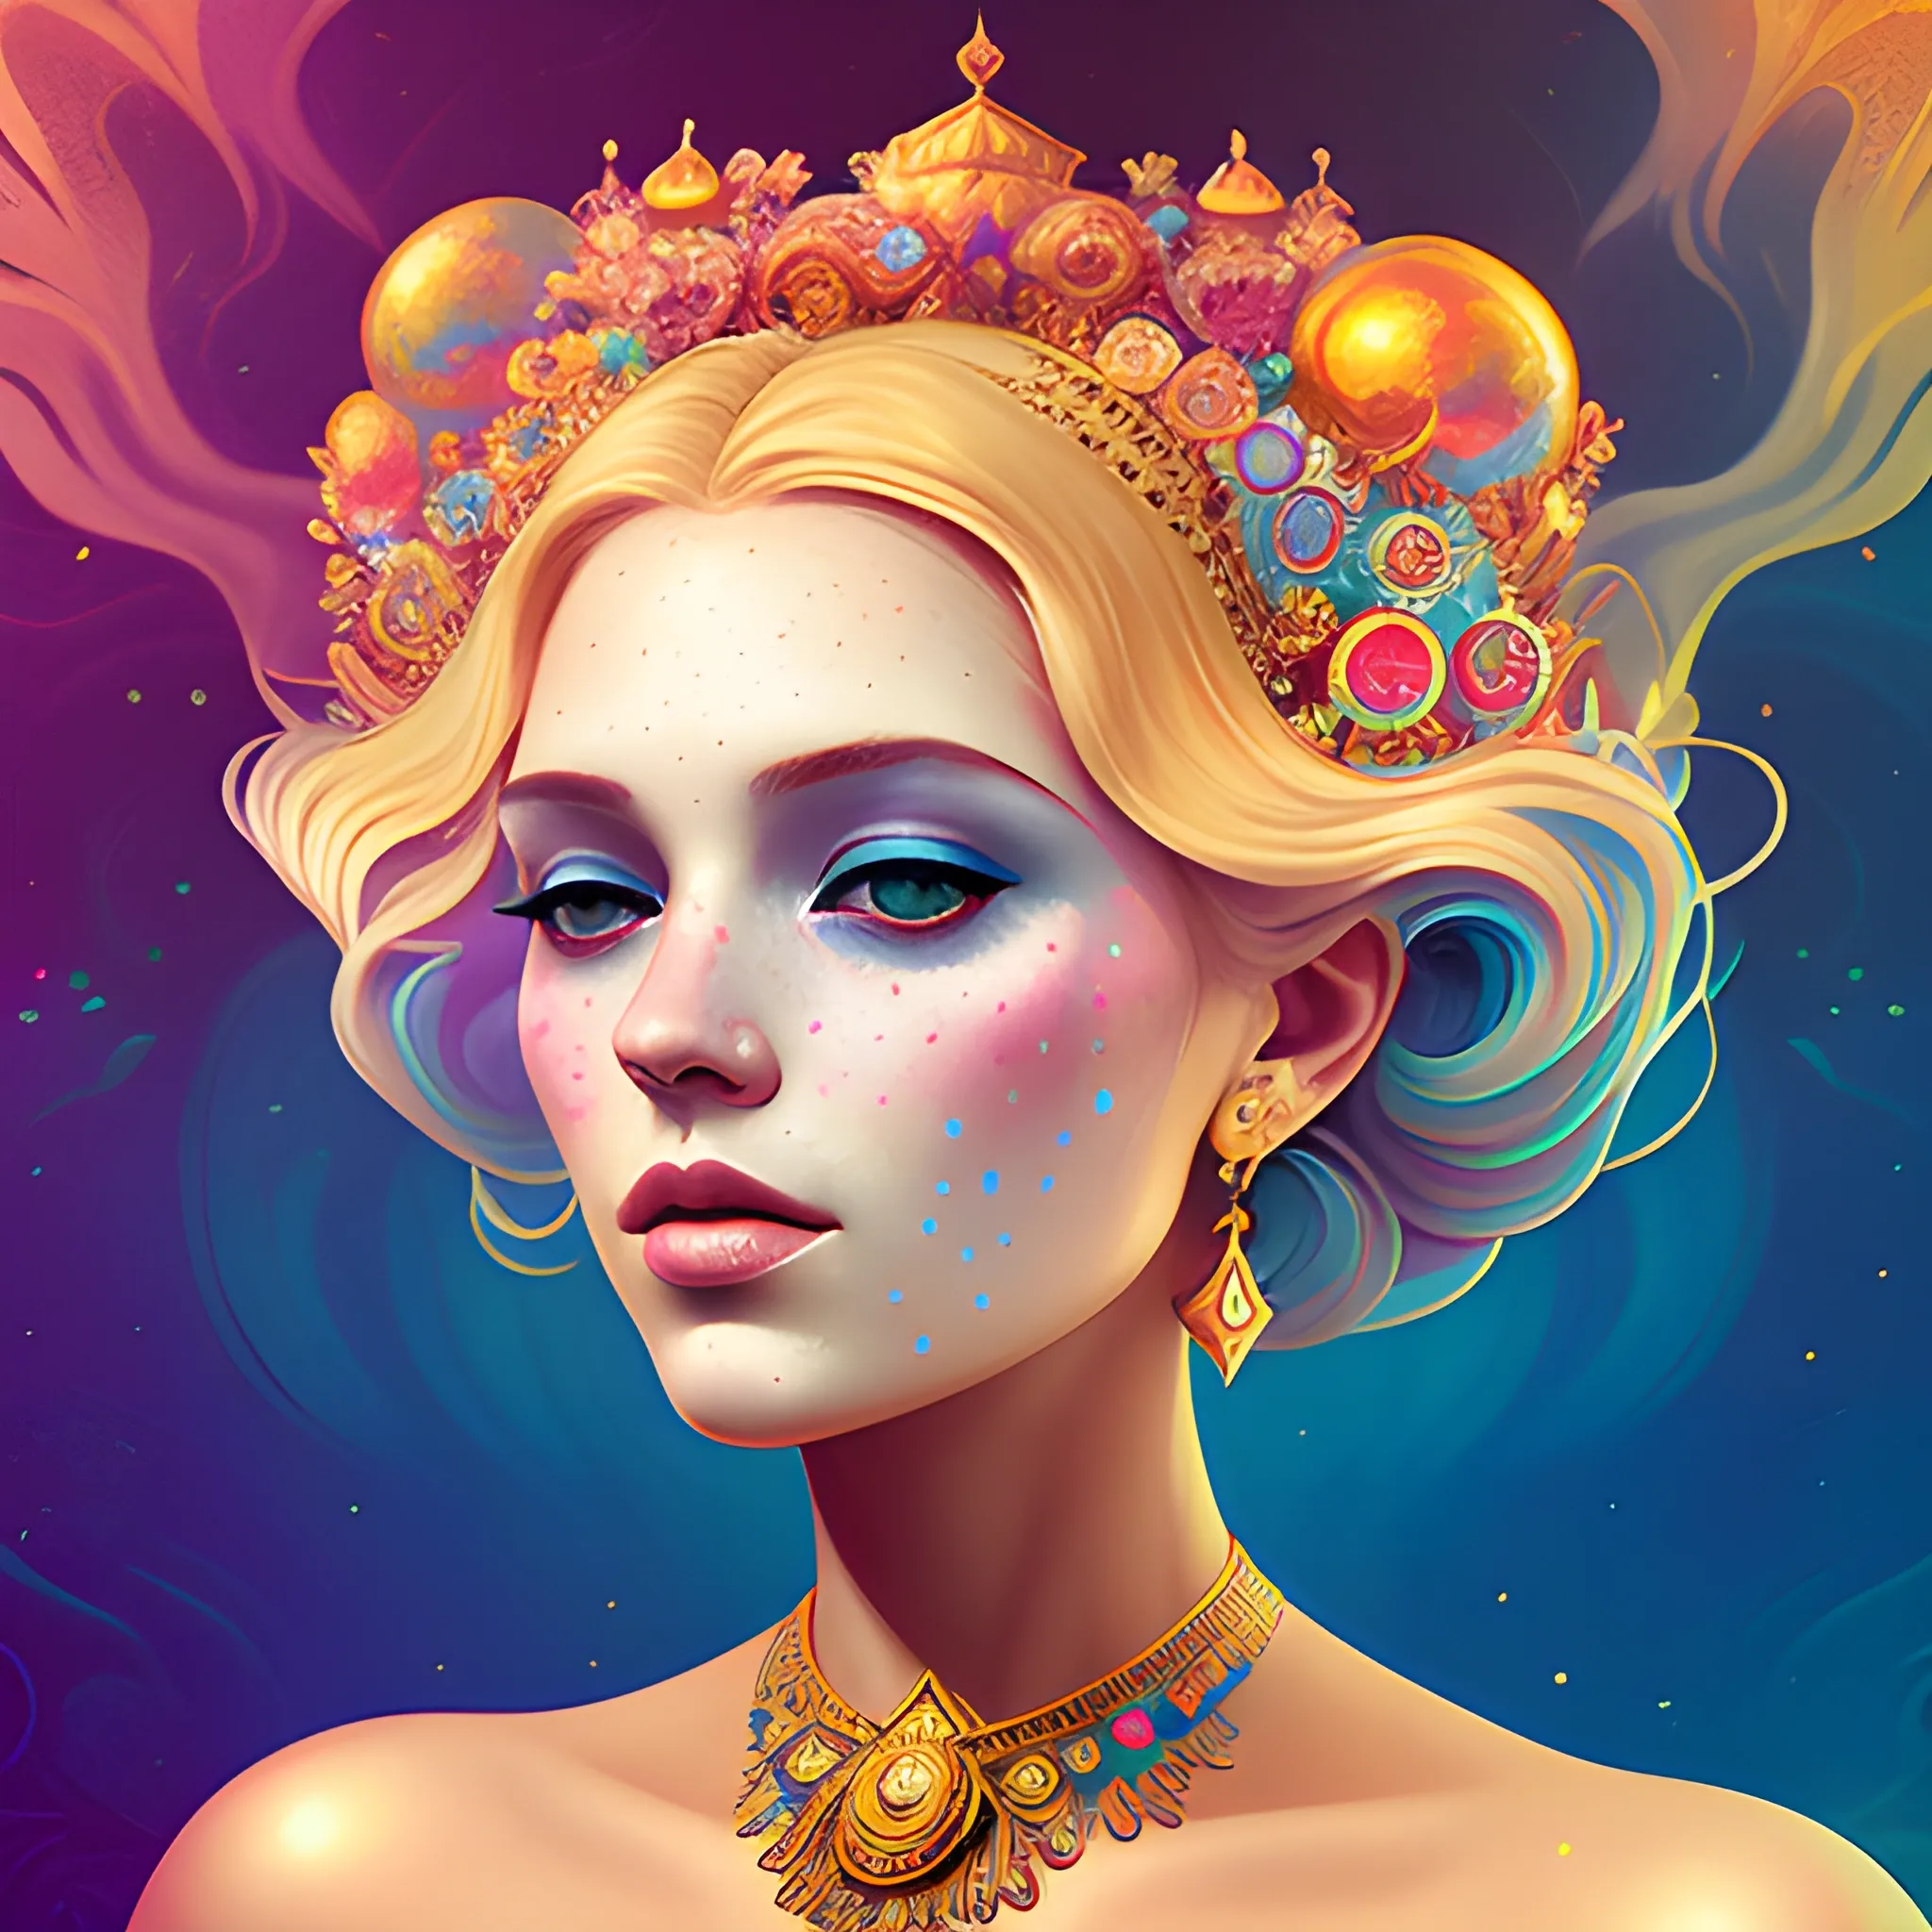 Flowery beautiful face blonde empress with gold jewellery, by petros afshar, ross tran, Tom Bagshaw, tom whalen, underwater bubbly psychedelic clouds, Anaglyph 3D lens blur effect